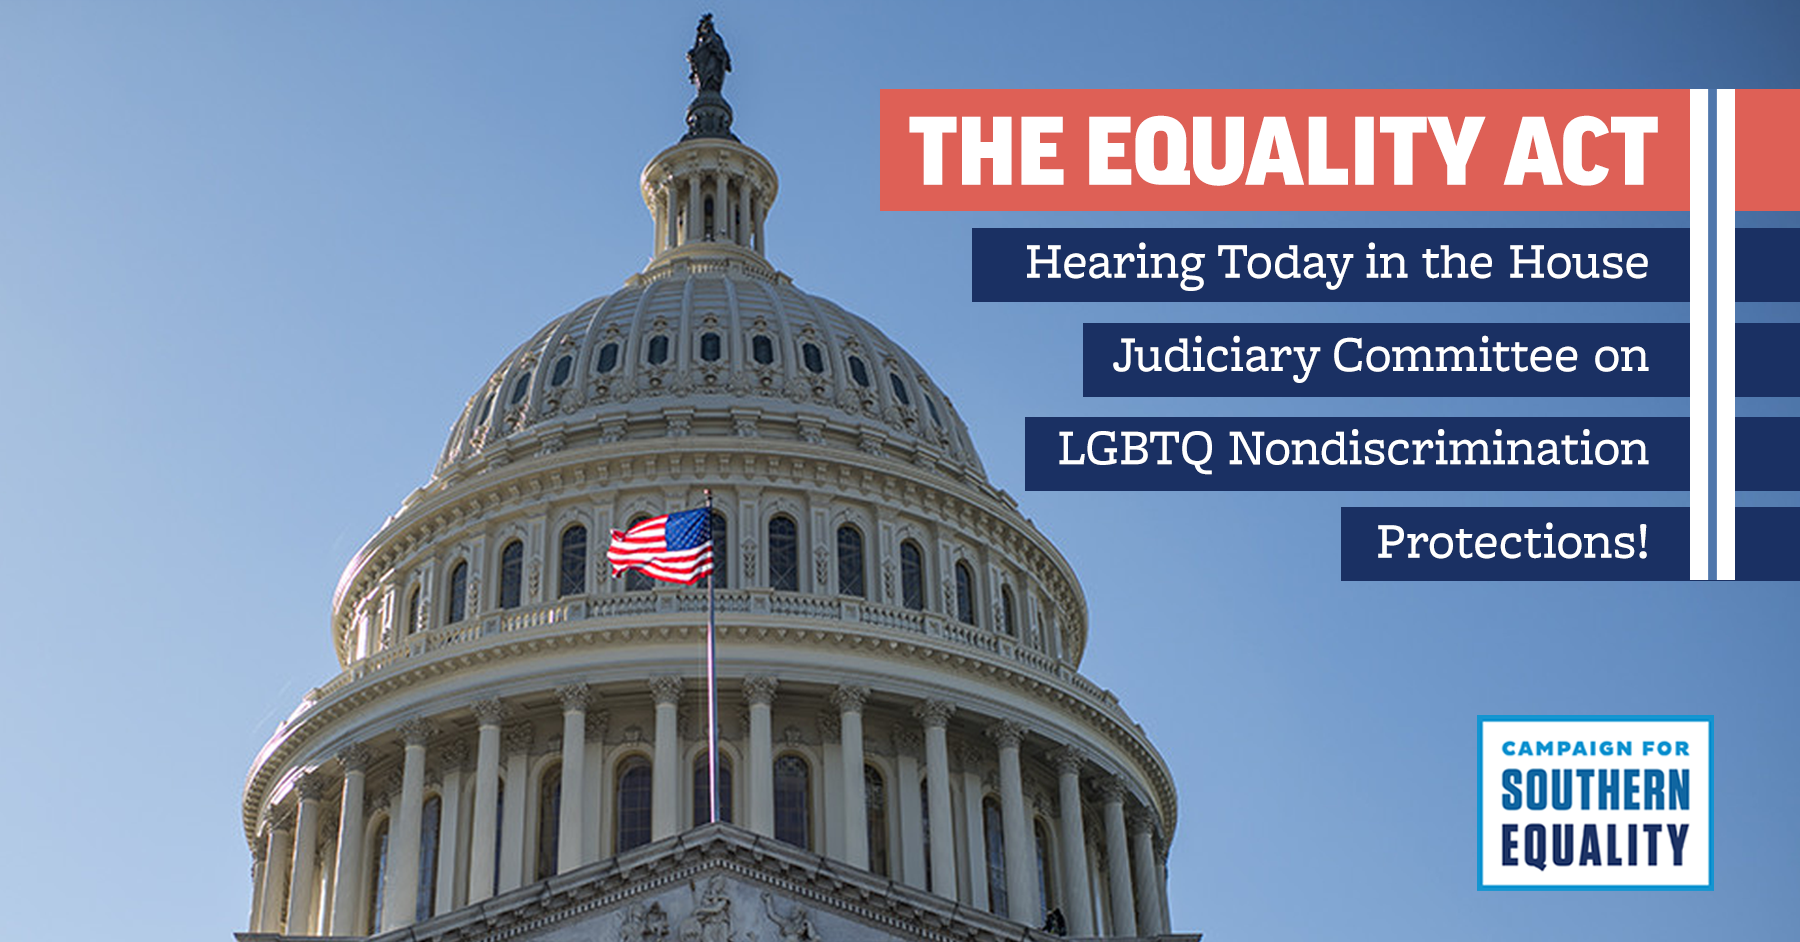 House Judiciary Committee Holds Hearing Equality Act, Federal LGBTQ Nondiscrimination Bill - Campaign for Southern Equality